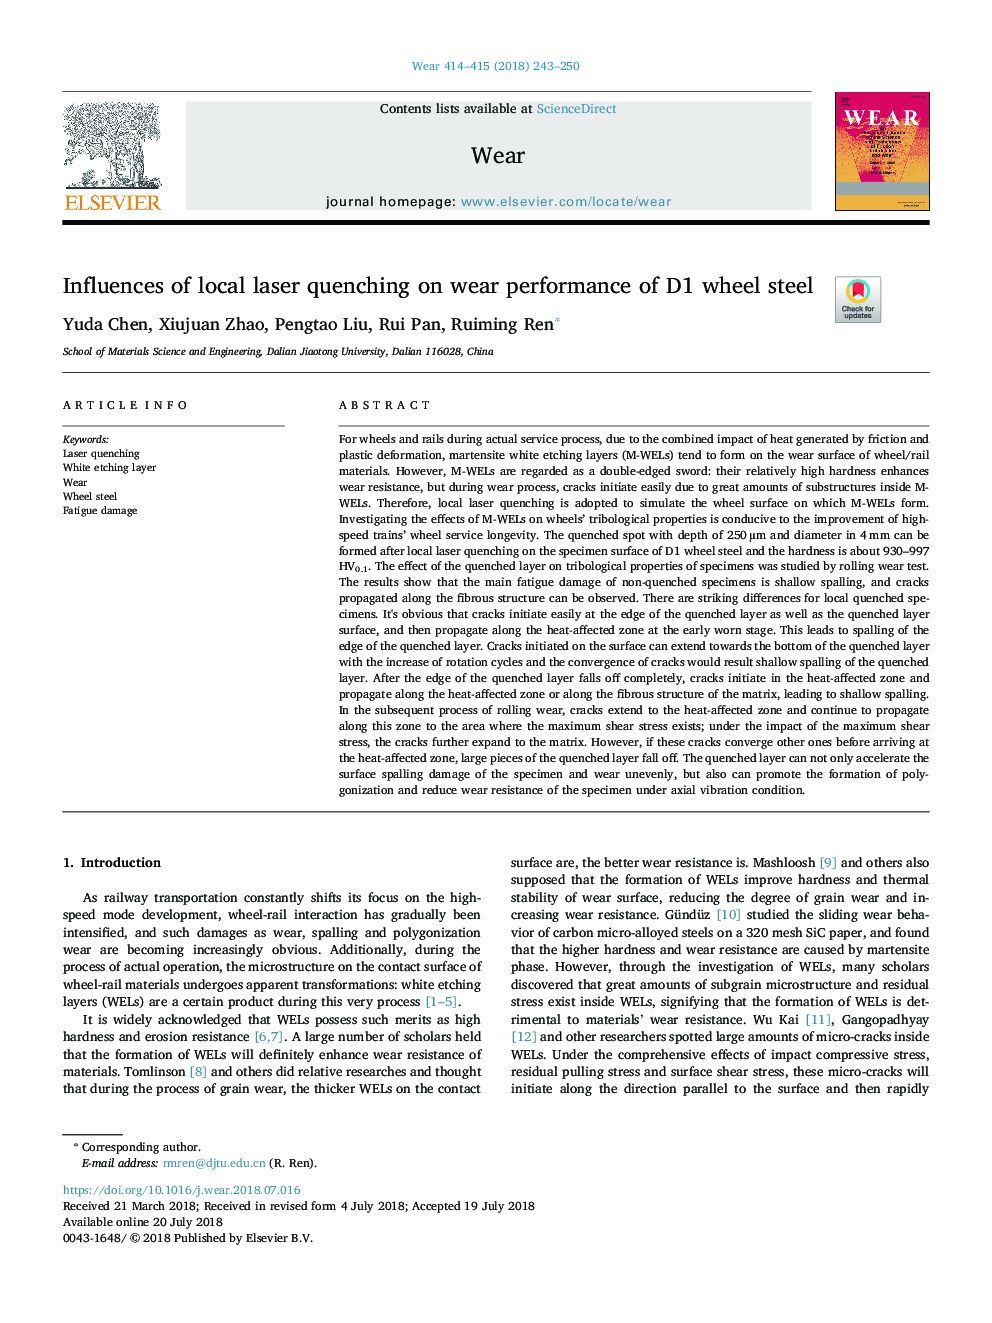 Influences of local laser quenching on wear performance of D1 wheel steel